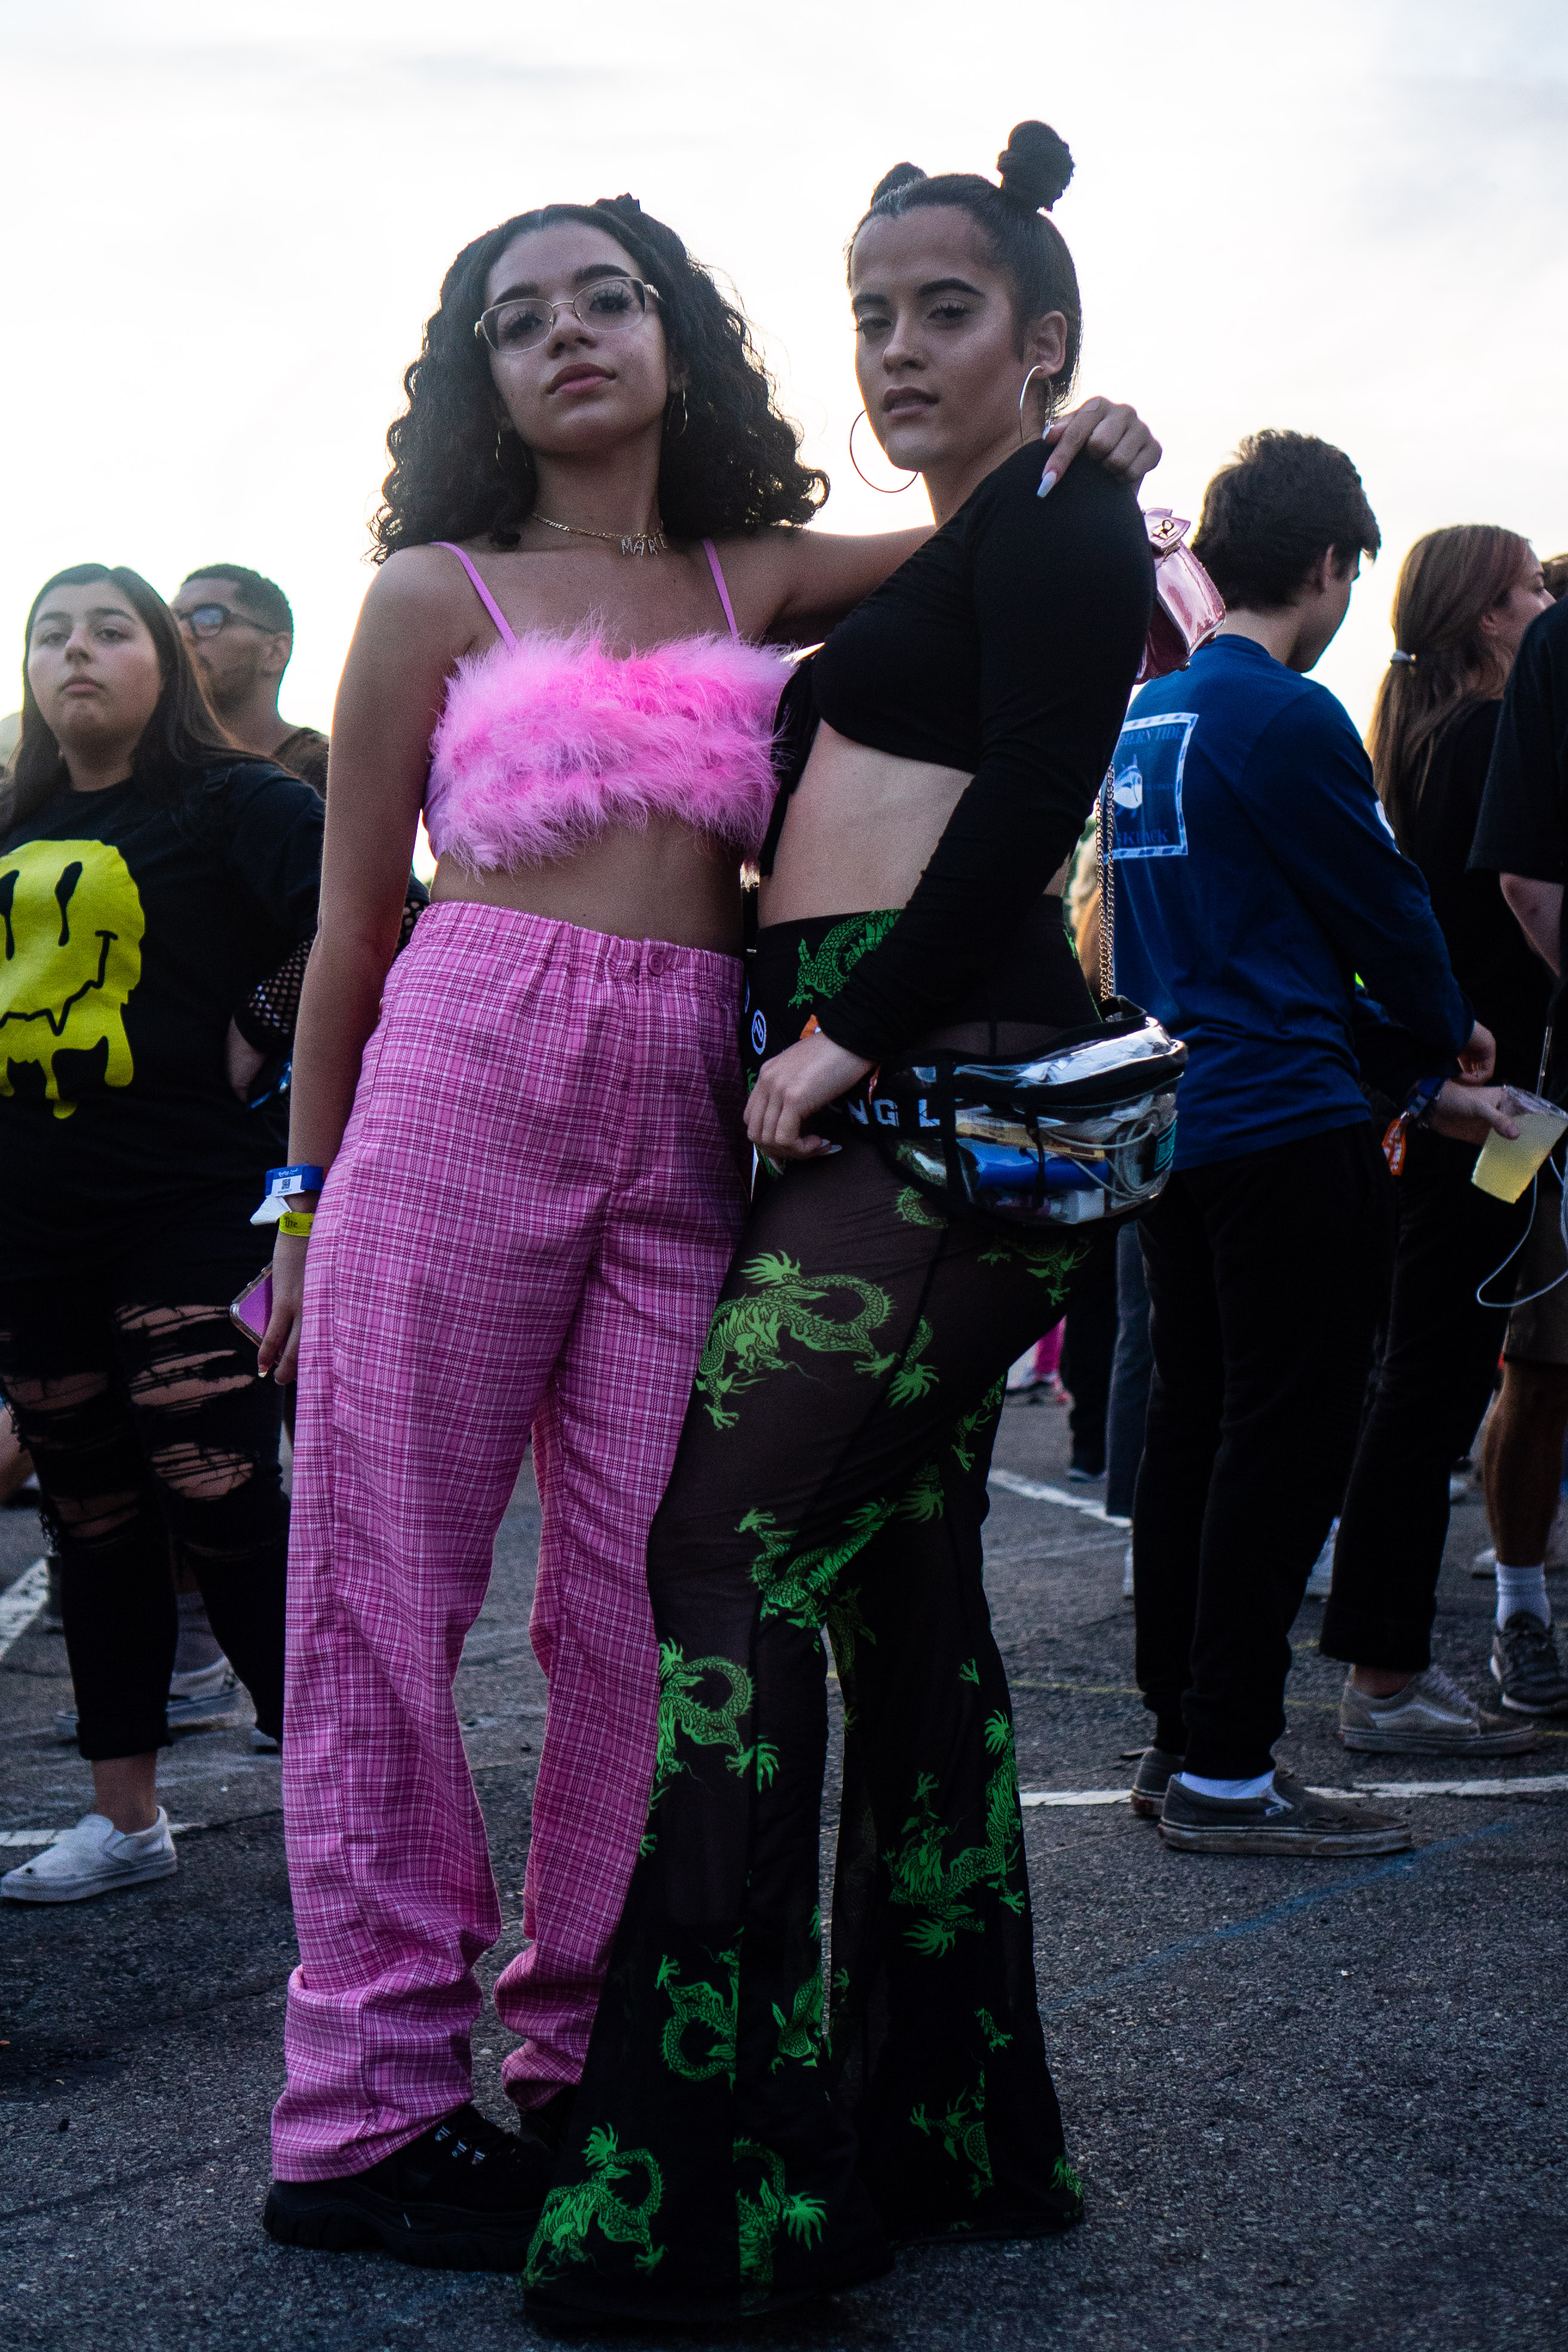 Women Make A Statement At Rolling Loud New York's Inaugural Event